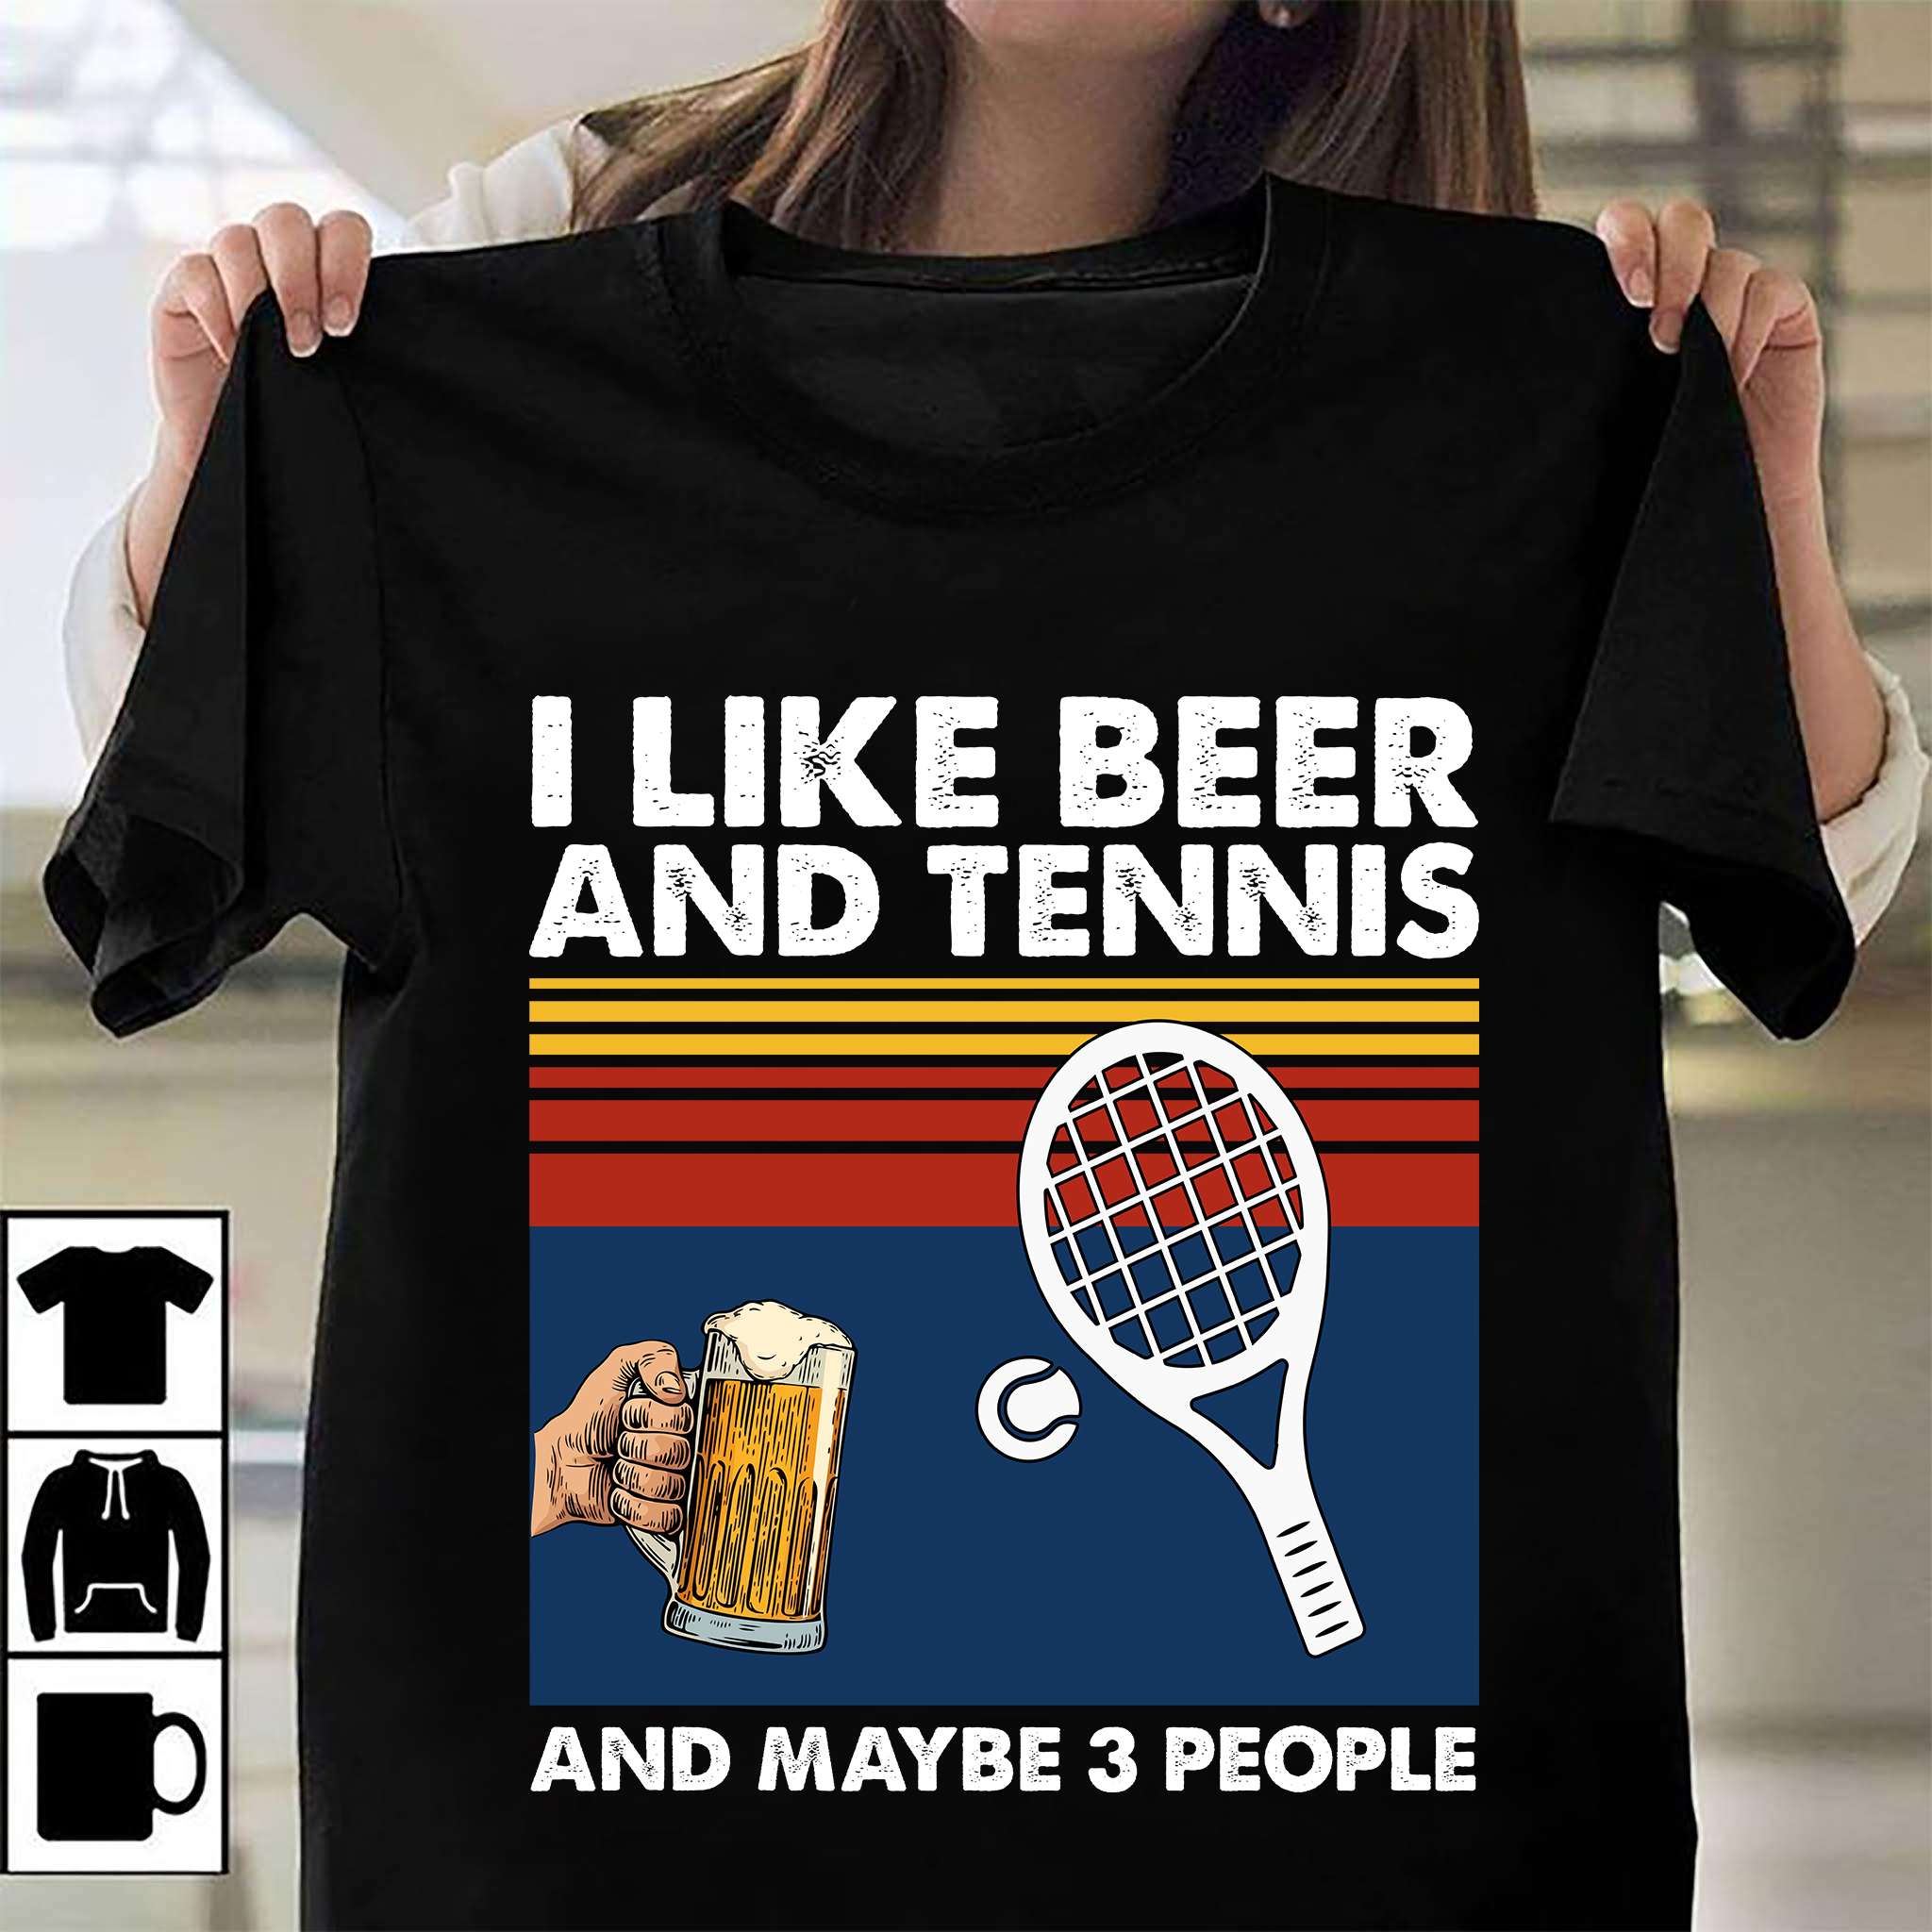 I like beer and tennis and maybe 3 people - Tennis racket, cup of beer